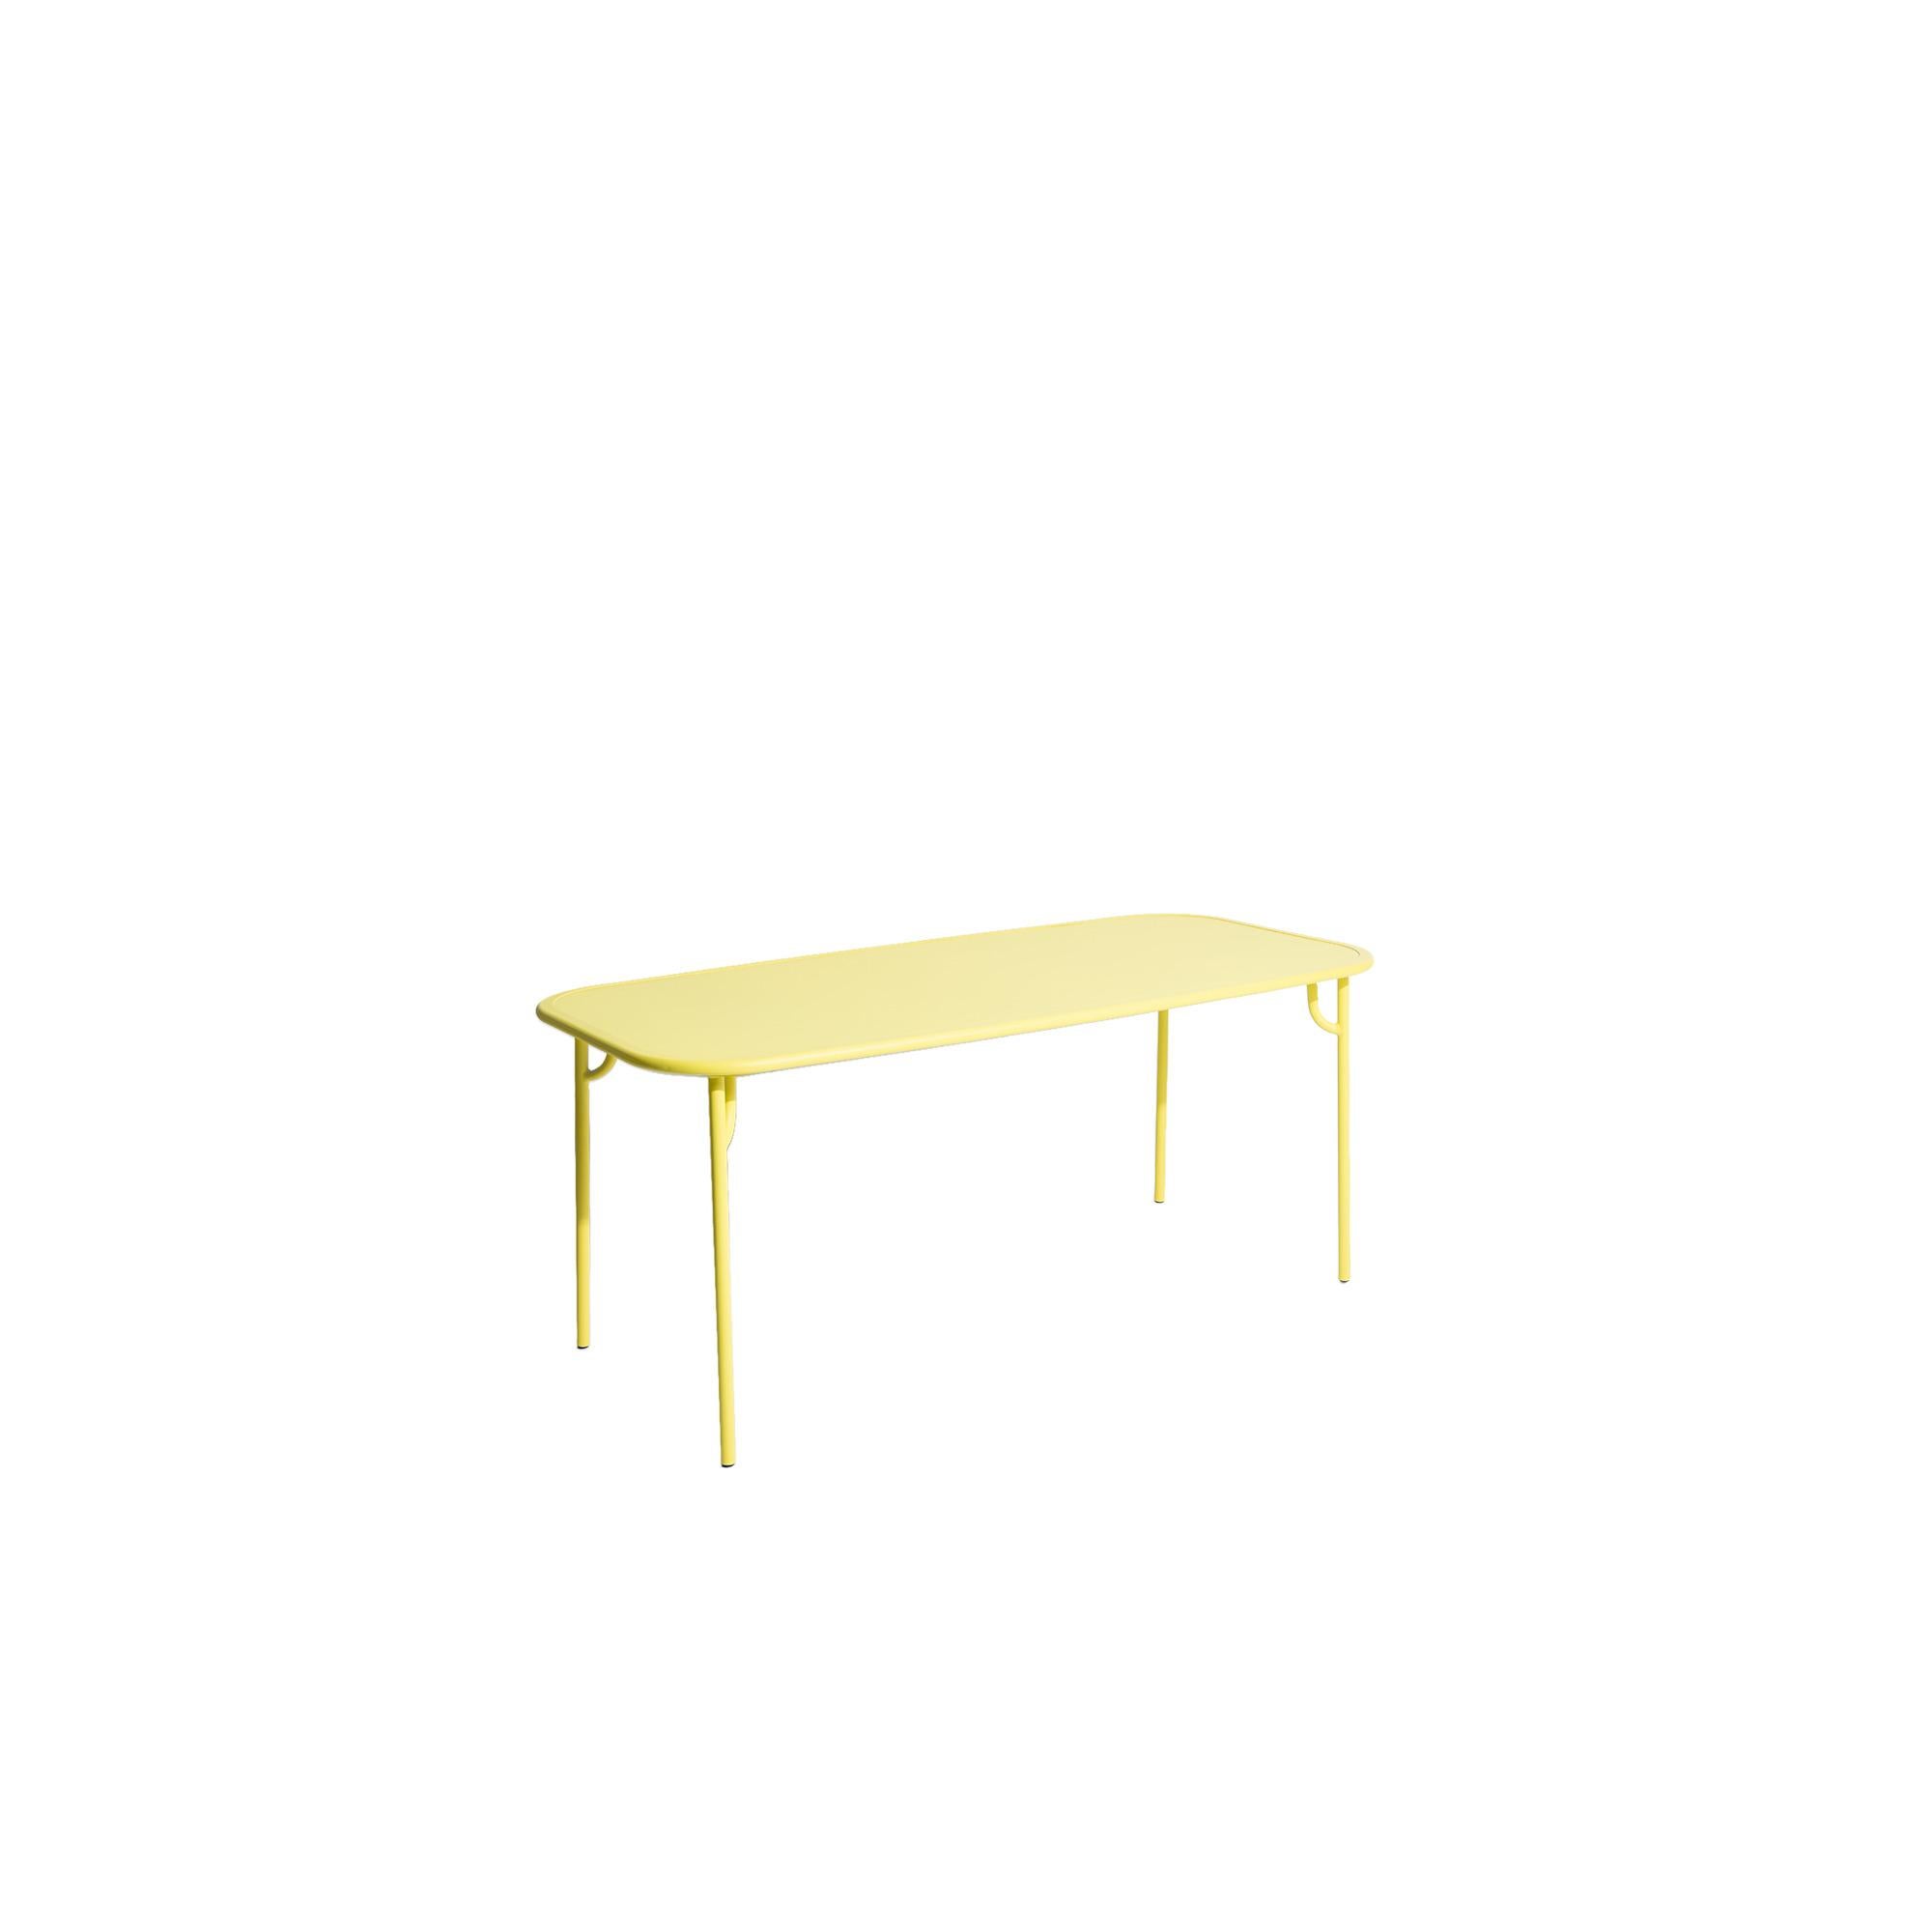 Petite Friture Week-End Medium Plain Rectangular Dining Table in Yellow Aluminium by Studio BrichetZiegler, 2017

The week-end collection is a full range of outdoor furniture, in aluminium grained epoxy paint, matt finish, that includes 18